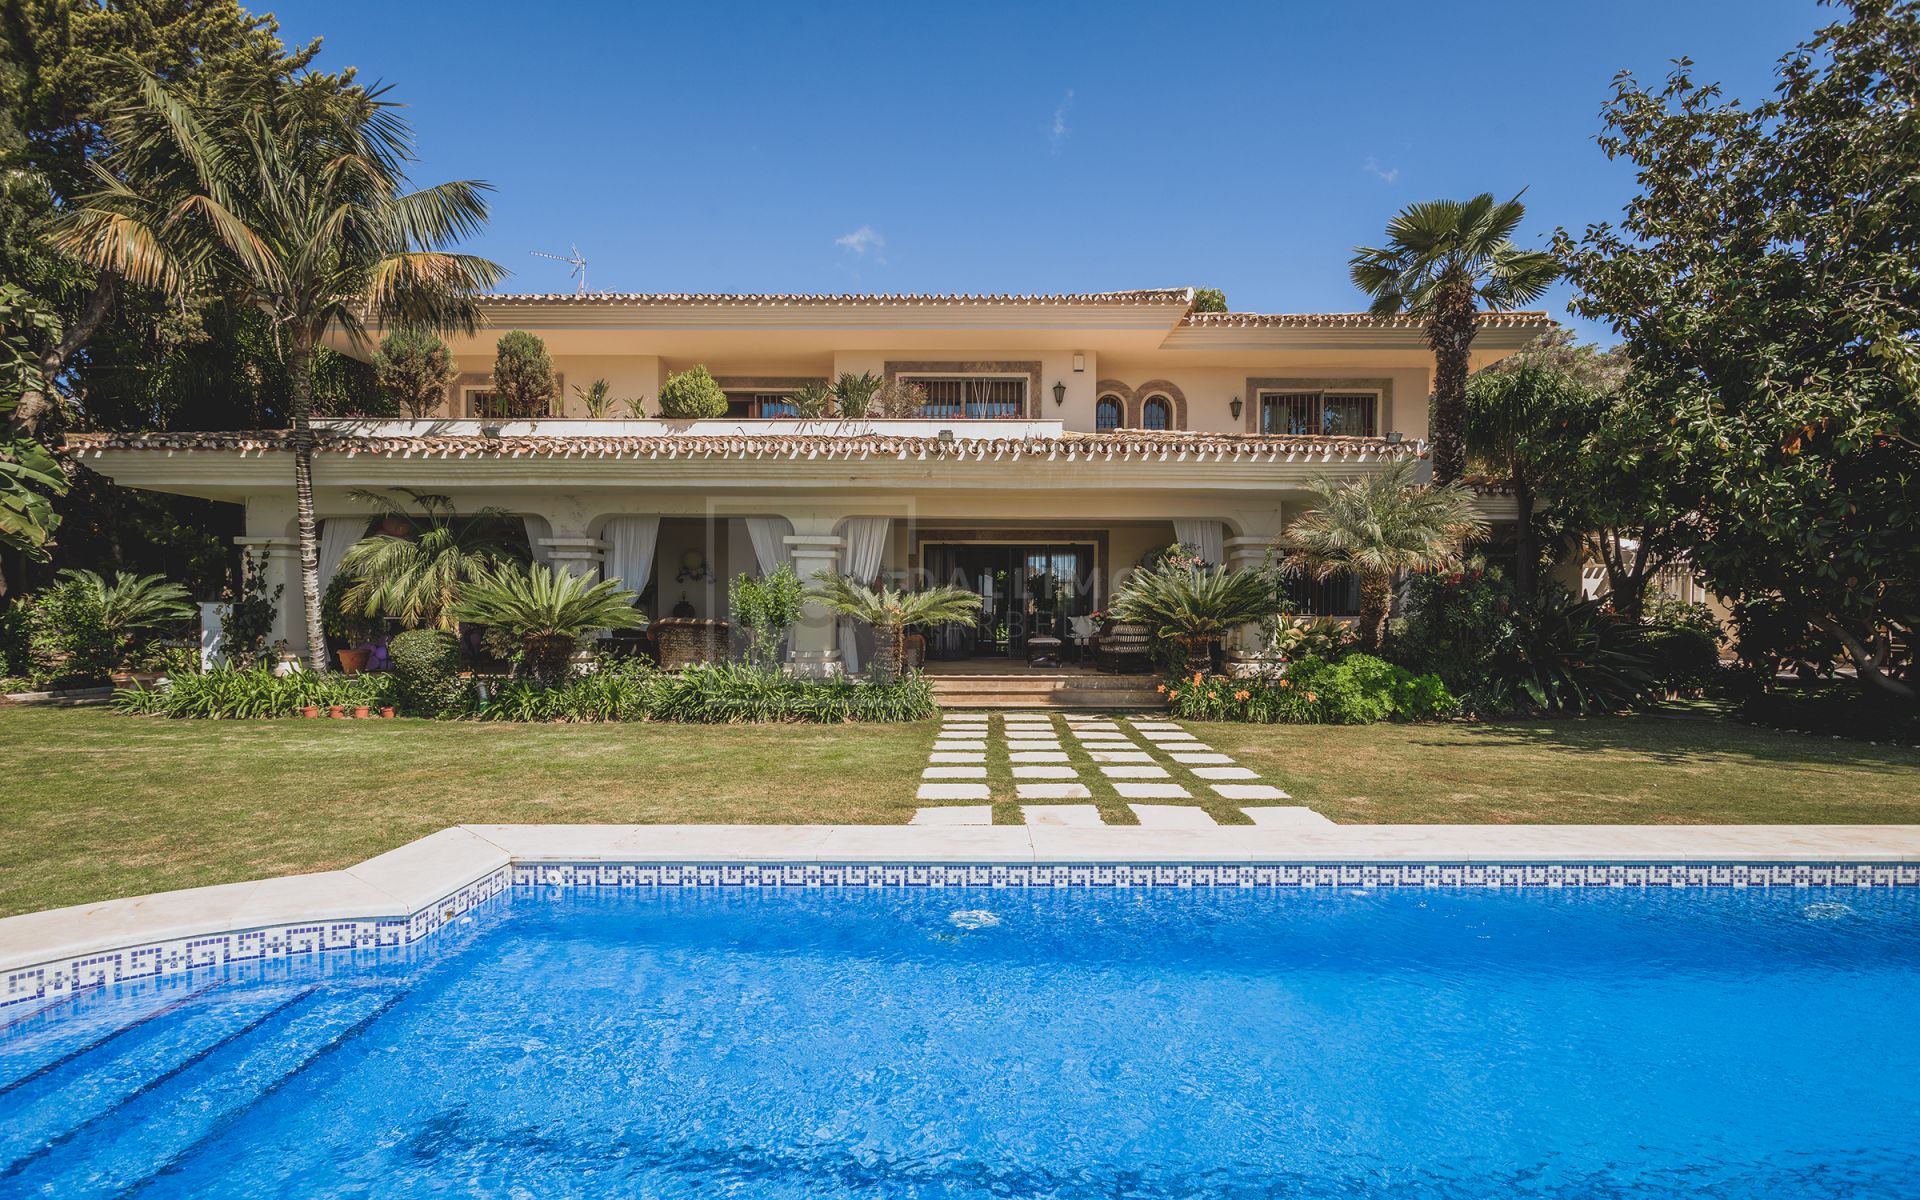 CLASSIC ANDALUSIAN 5-BEDROOM VILLA IN TRANQUIL AREA CENTRAL MARBELLA